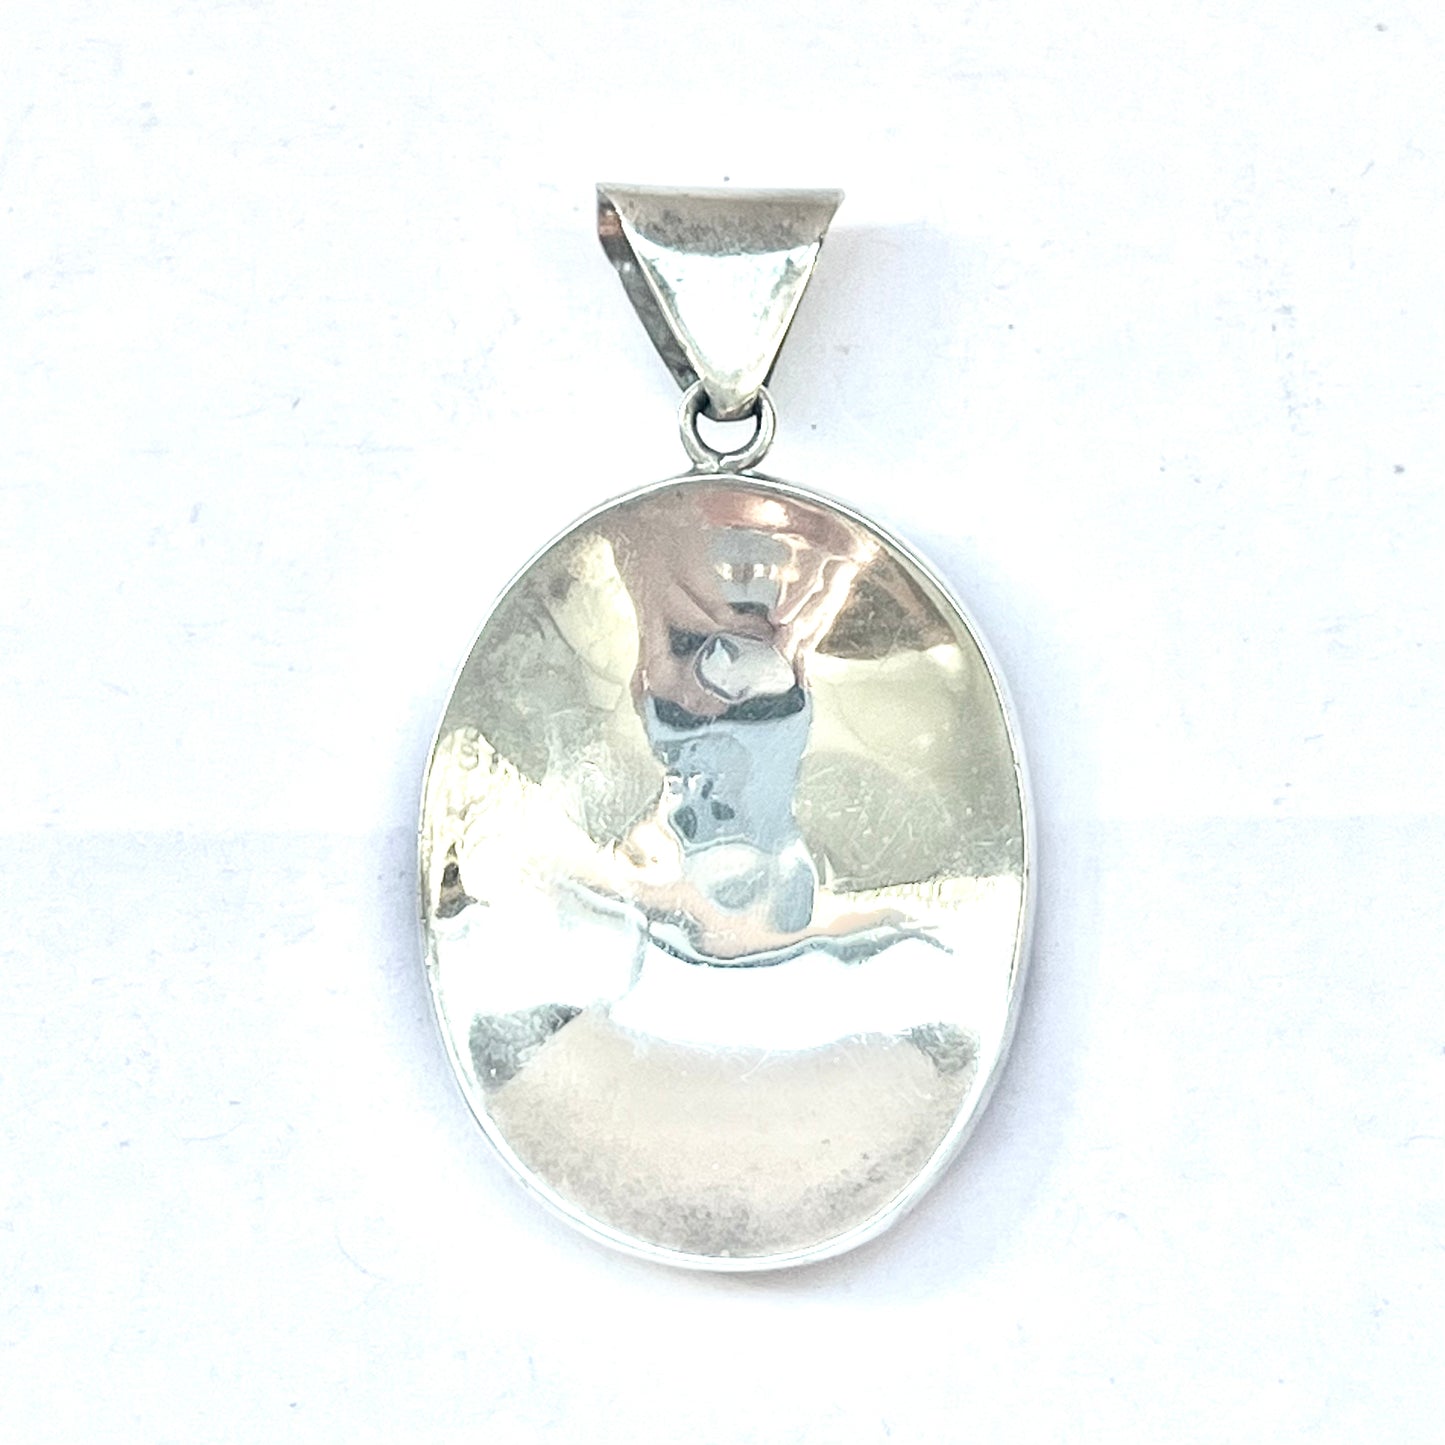 Vintage sterling silver and stone inlay pendant, Southwestern or Peruvian in style